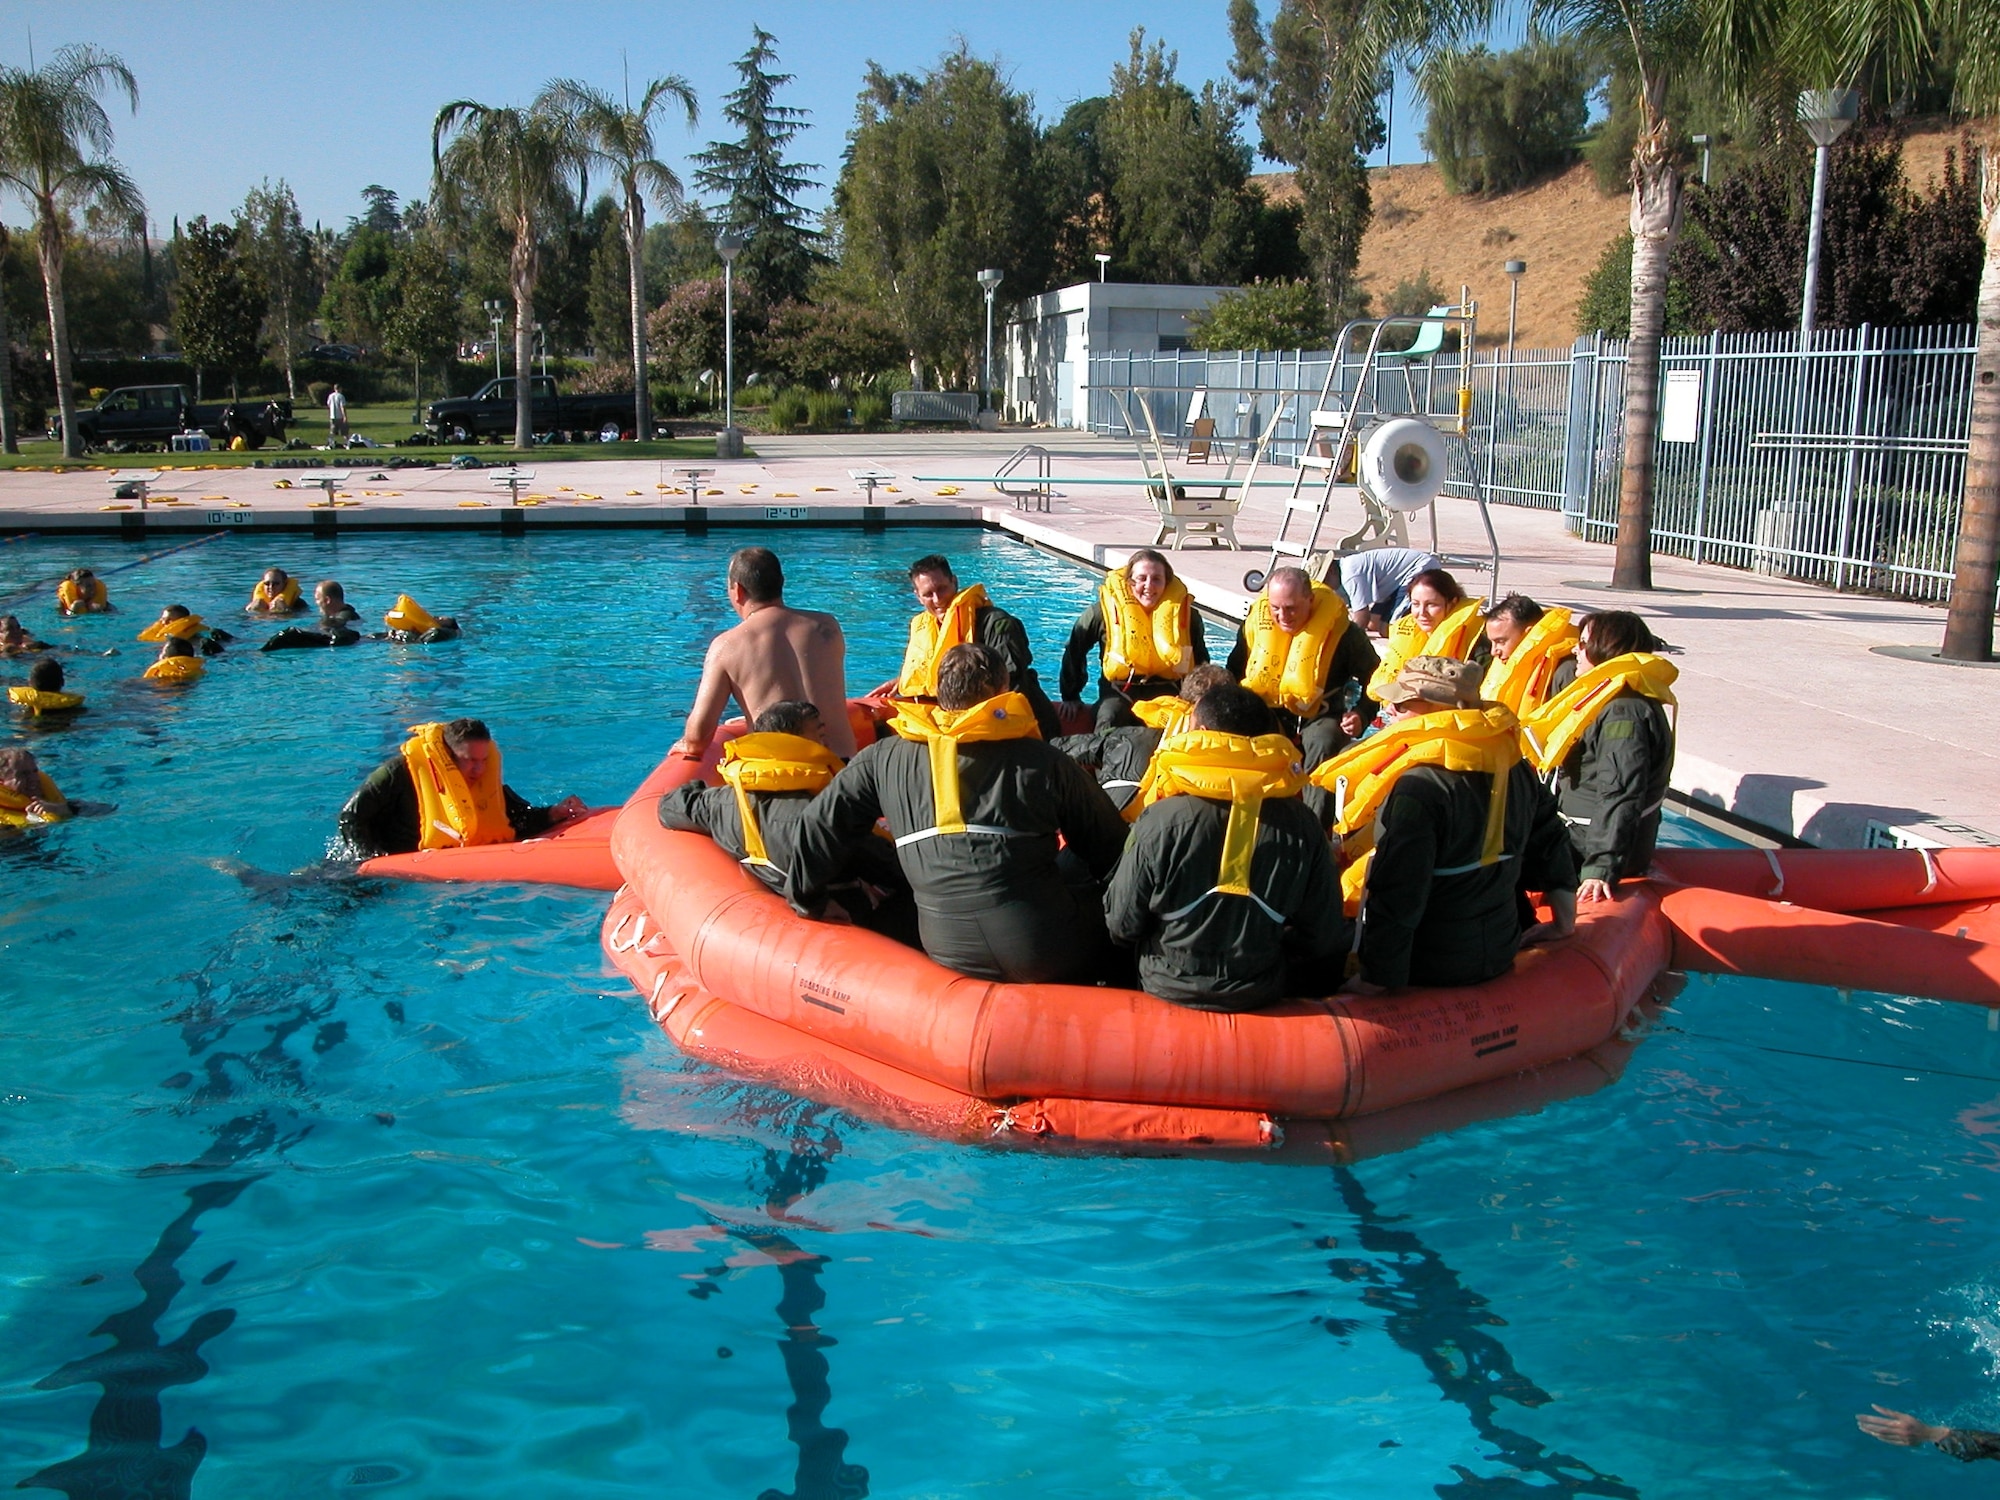 Tech. Sgt. Lawrence Hill, lead instructor (in raft, no shirt), shows an Airman how to properly climb up the boarding ramp of a 20-man life raft during a combat and water survival course at Loma Linda University’s Dryson Sports Center. (U.S. Air Force photo by Staff Sgt. Joe Davidson, 452 AMW/PA)